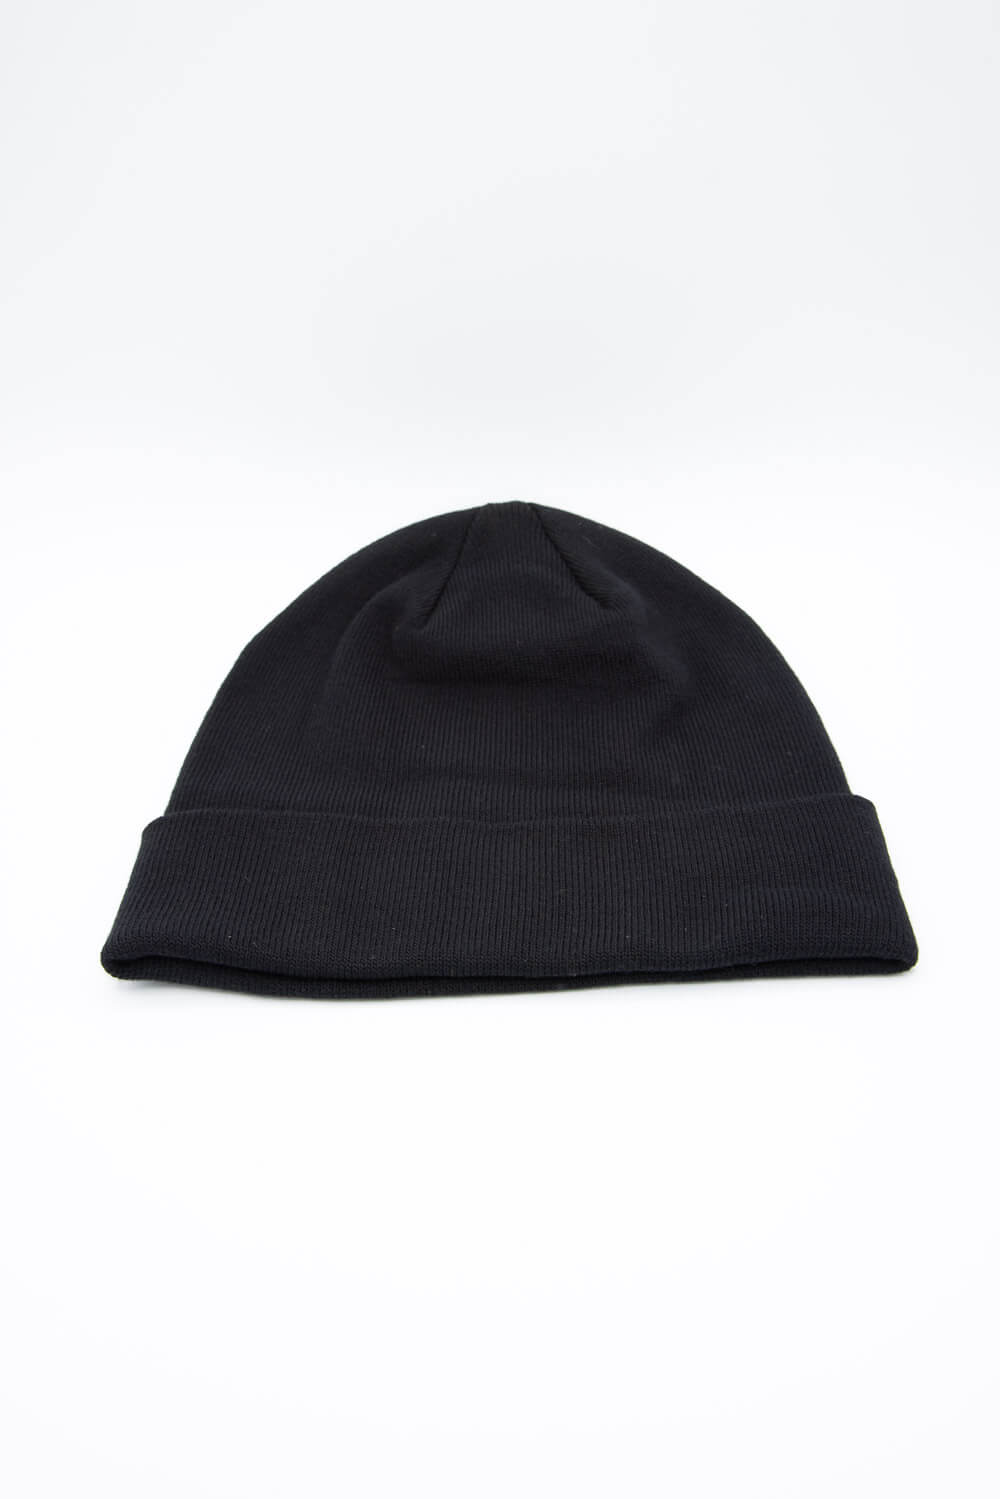 The North Face Dock Worker Recycled Beanie in Black | NF0A3FNT-KT0 – Glik's